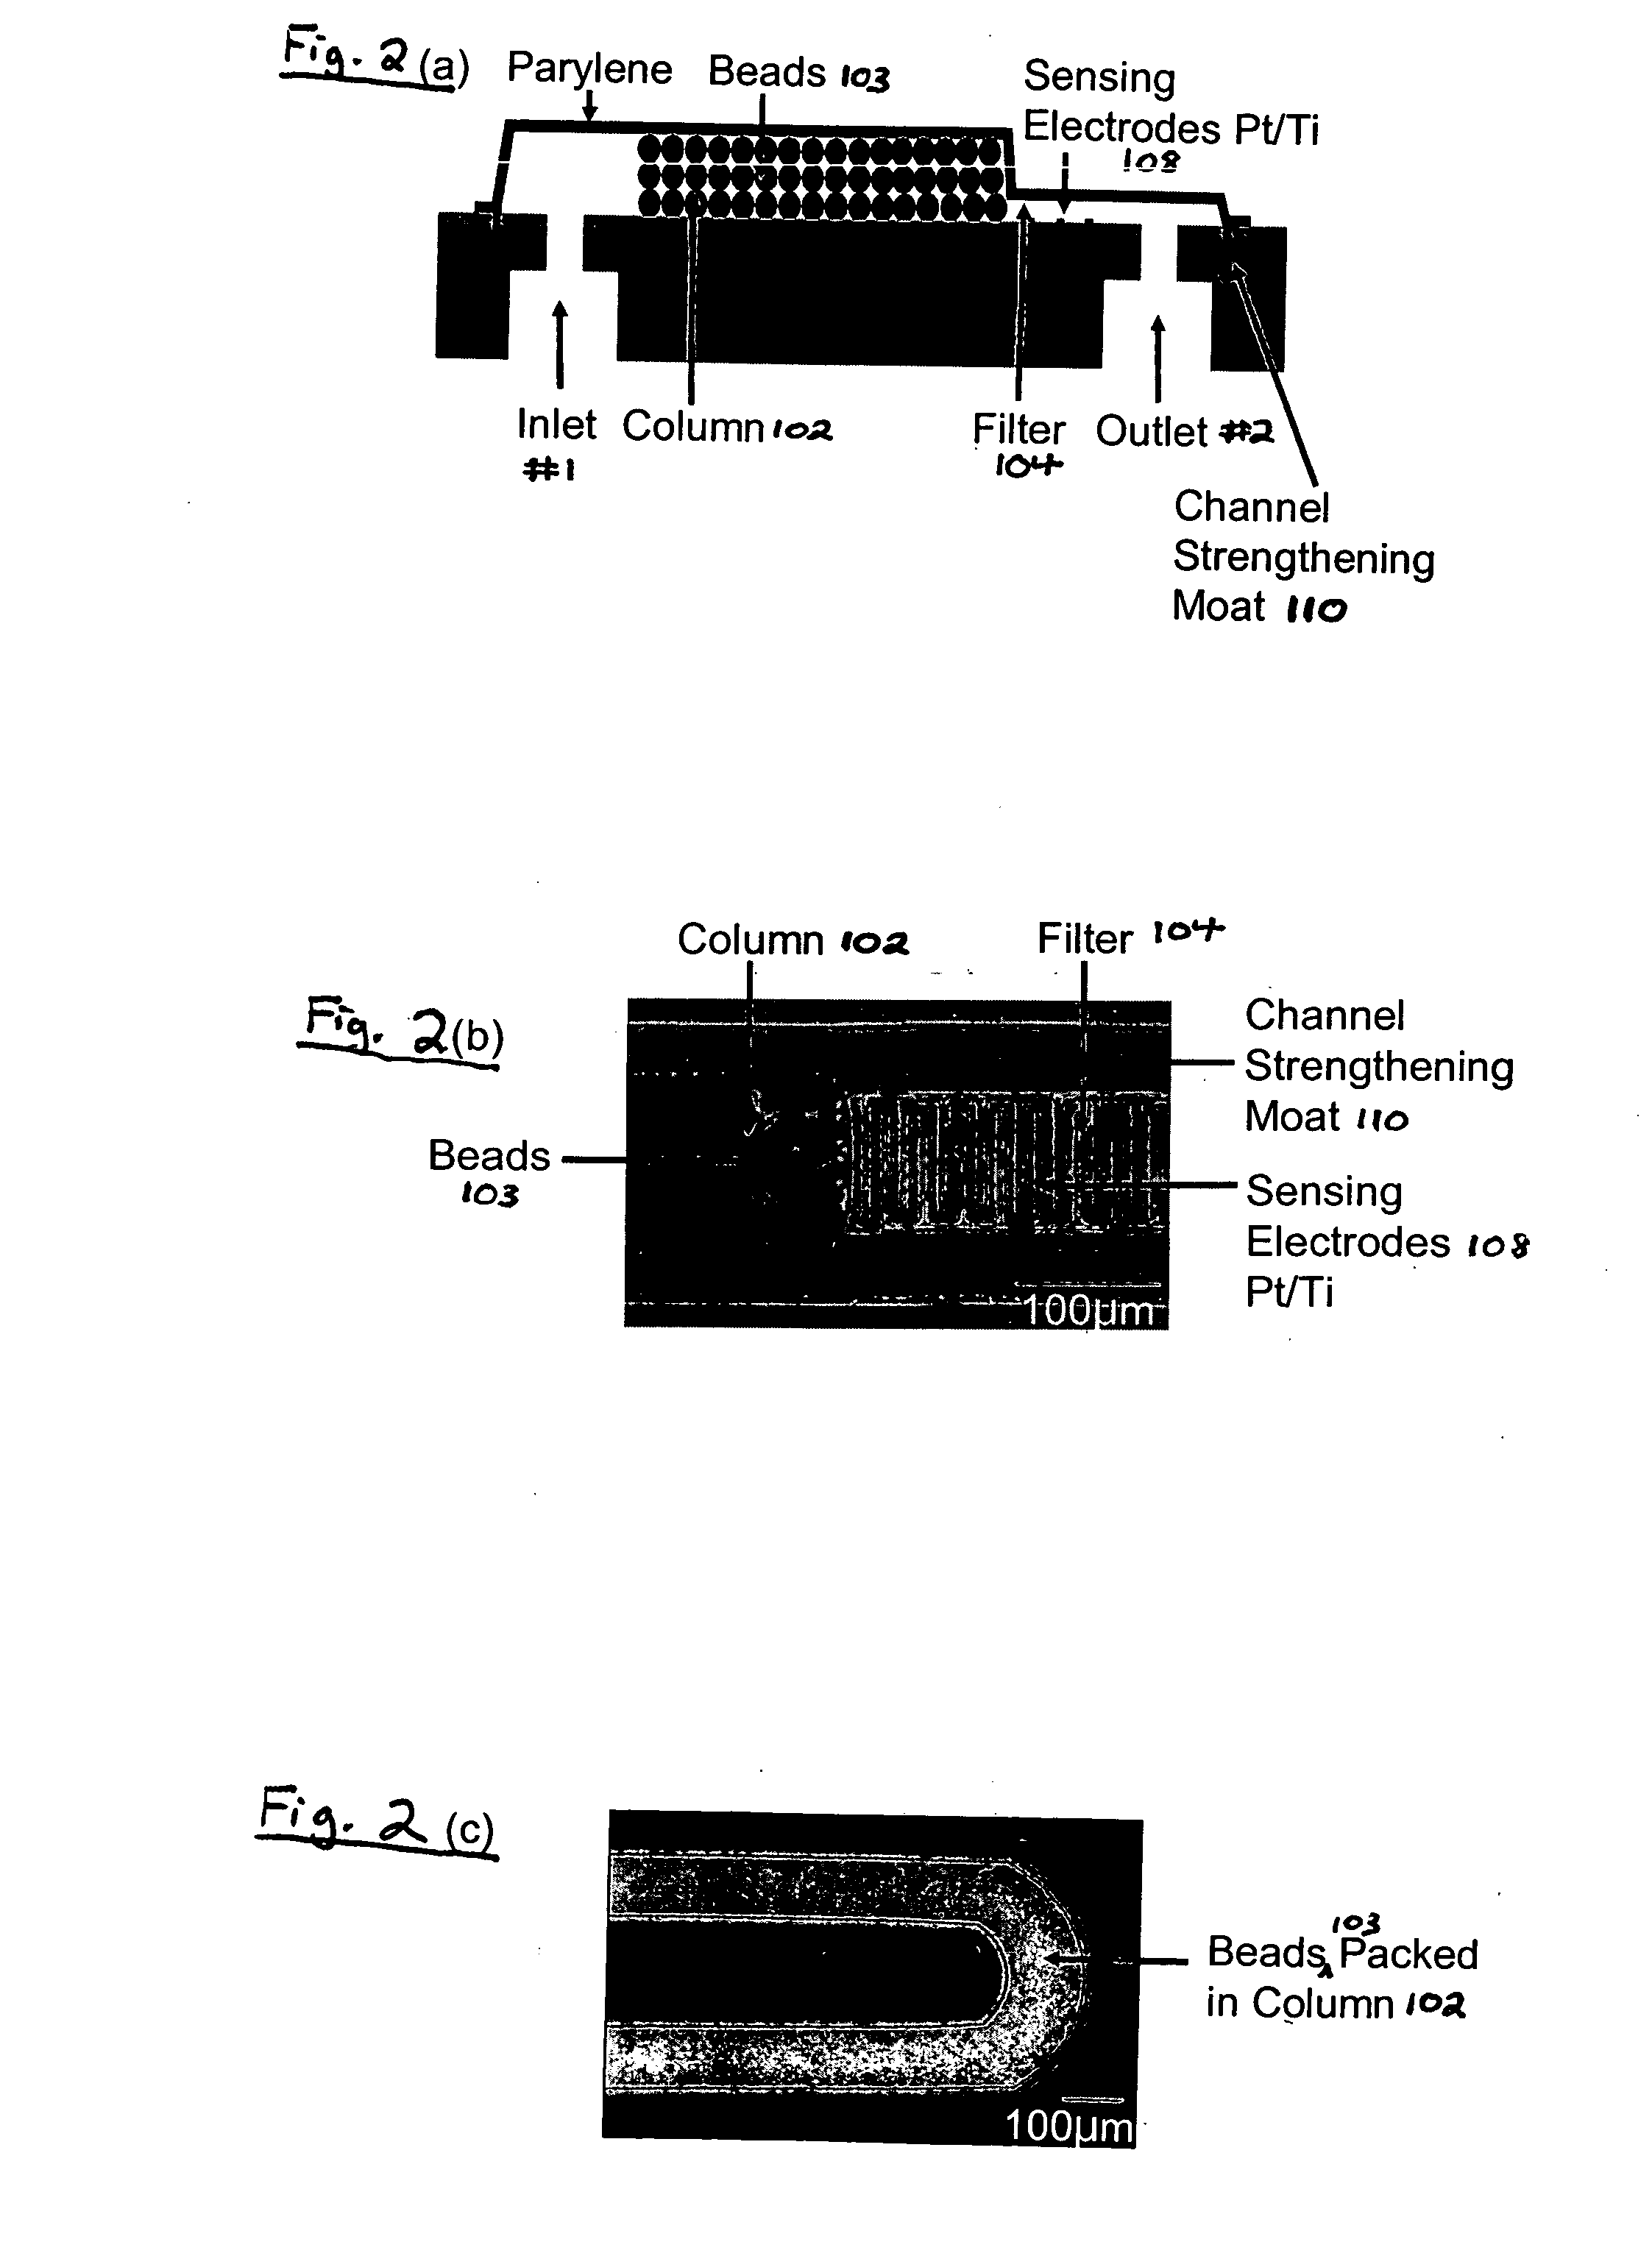 IC-processed polymer nano-liquid chromatography system on-a-chip and method of making it